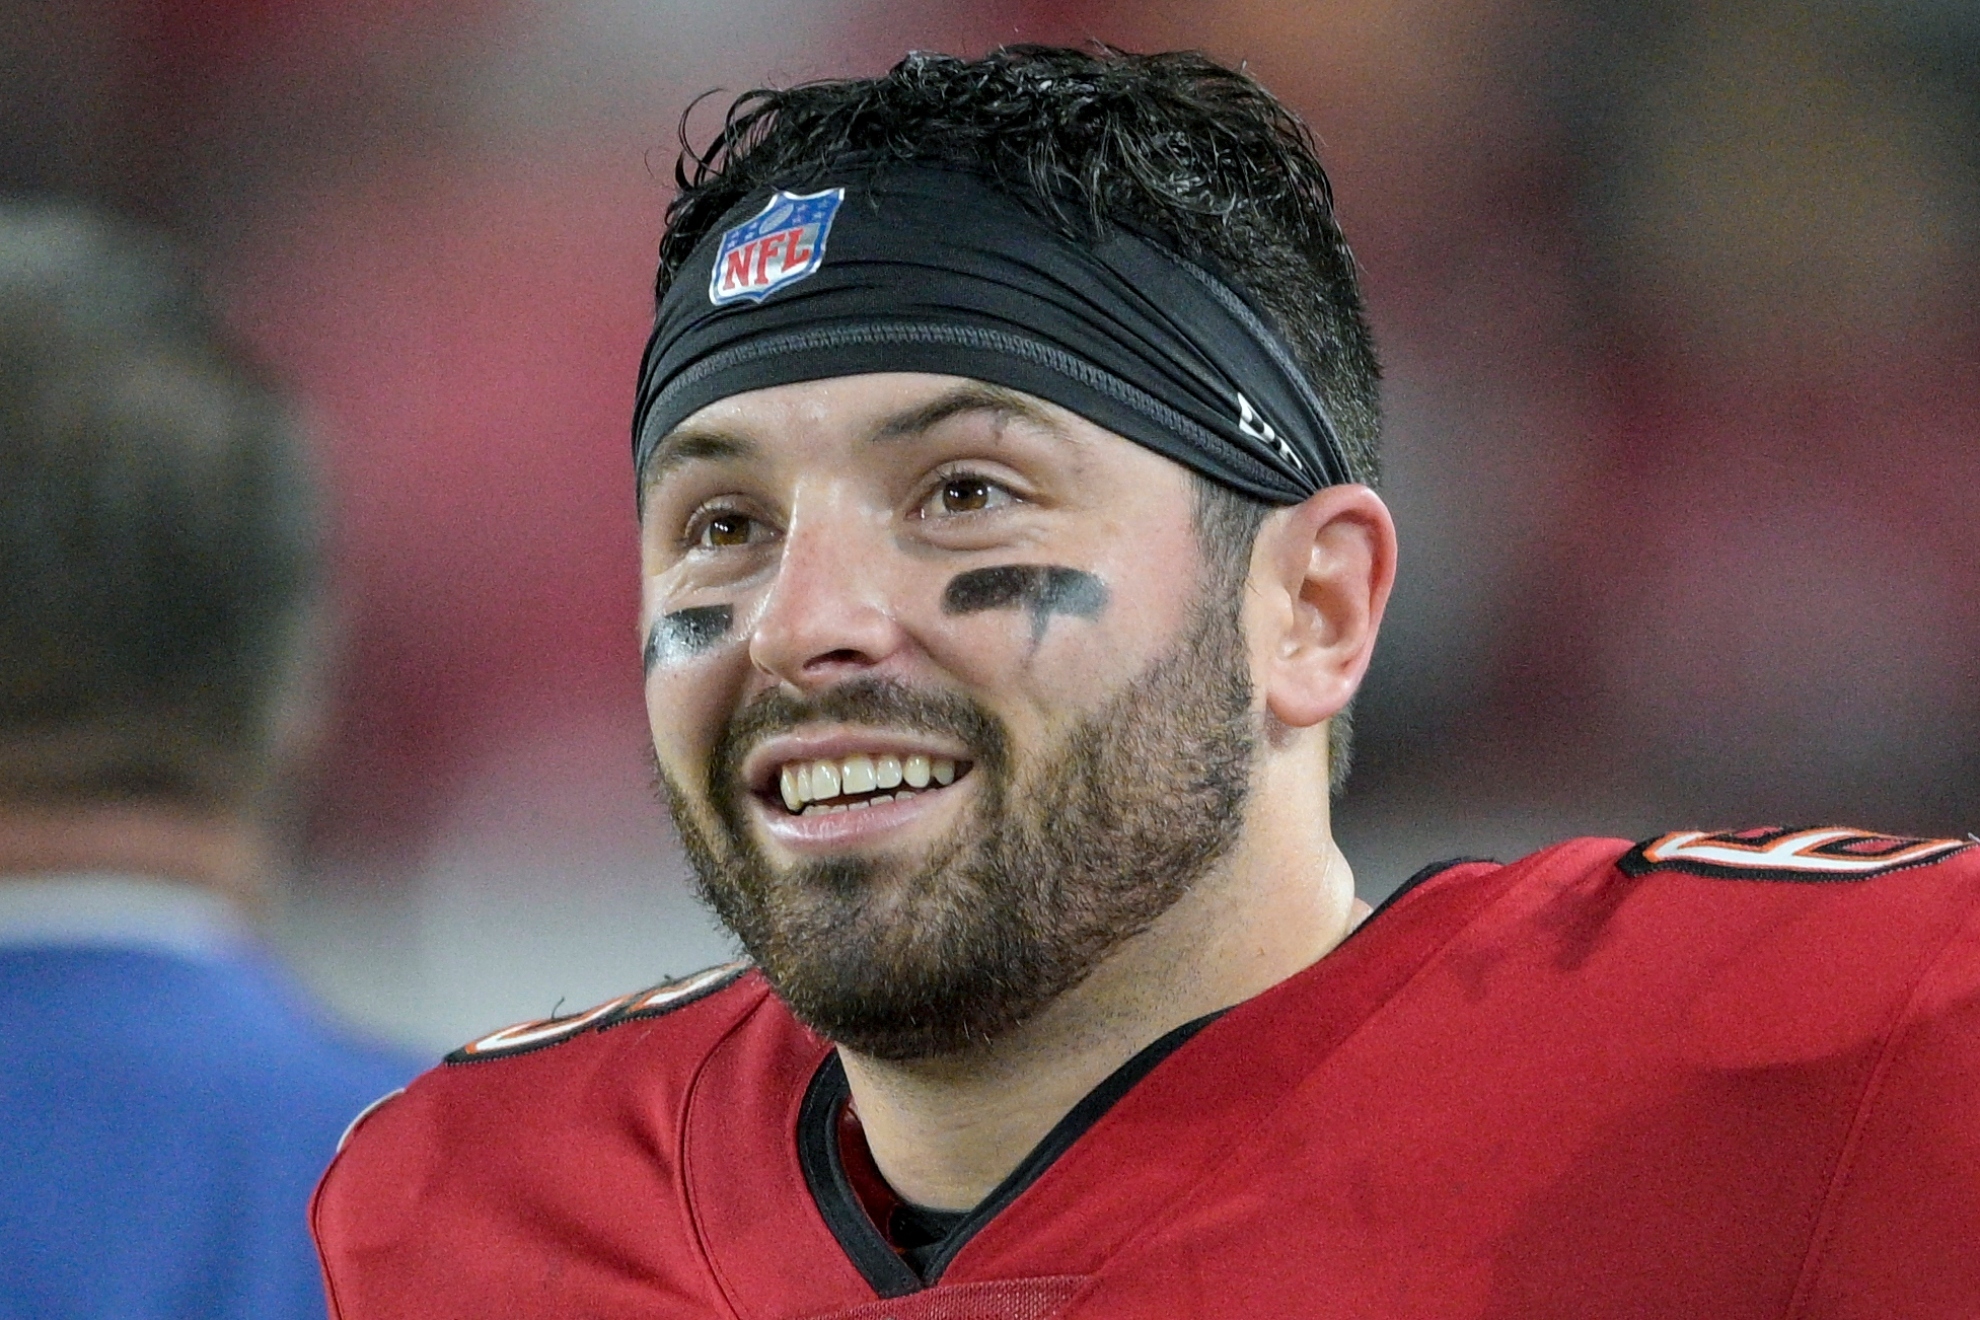 Touching down into parenthood: Bucs Star Baker Mayfield announces birth of first child